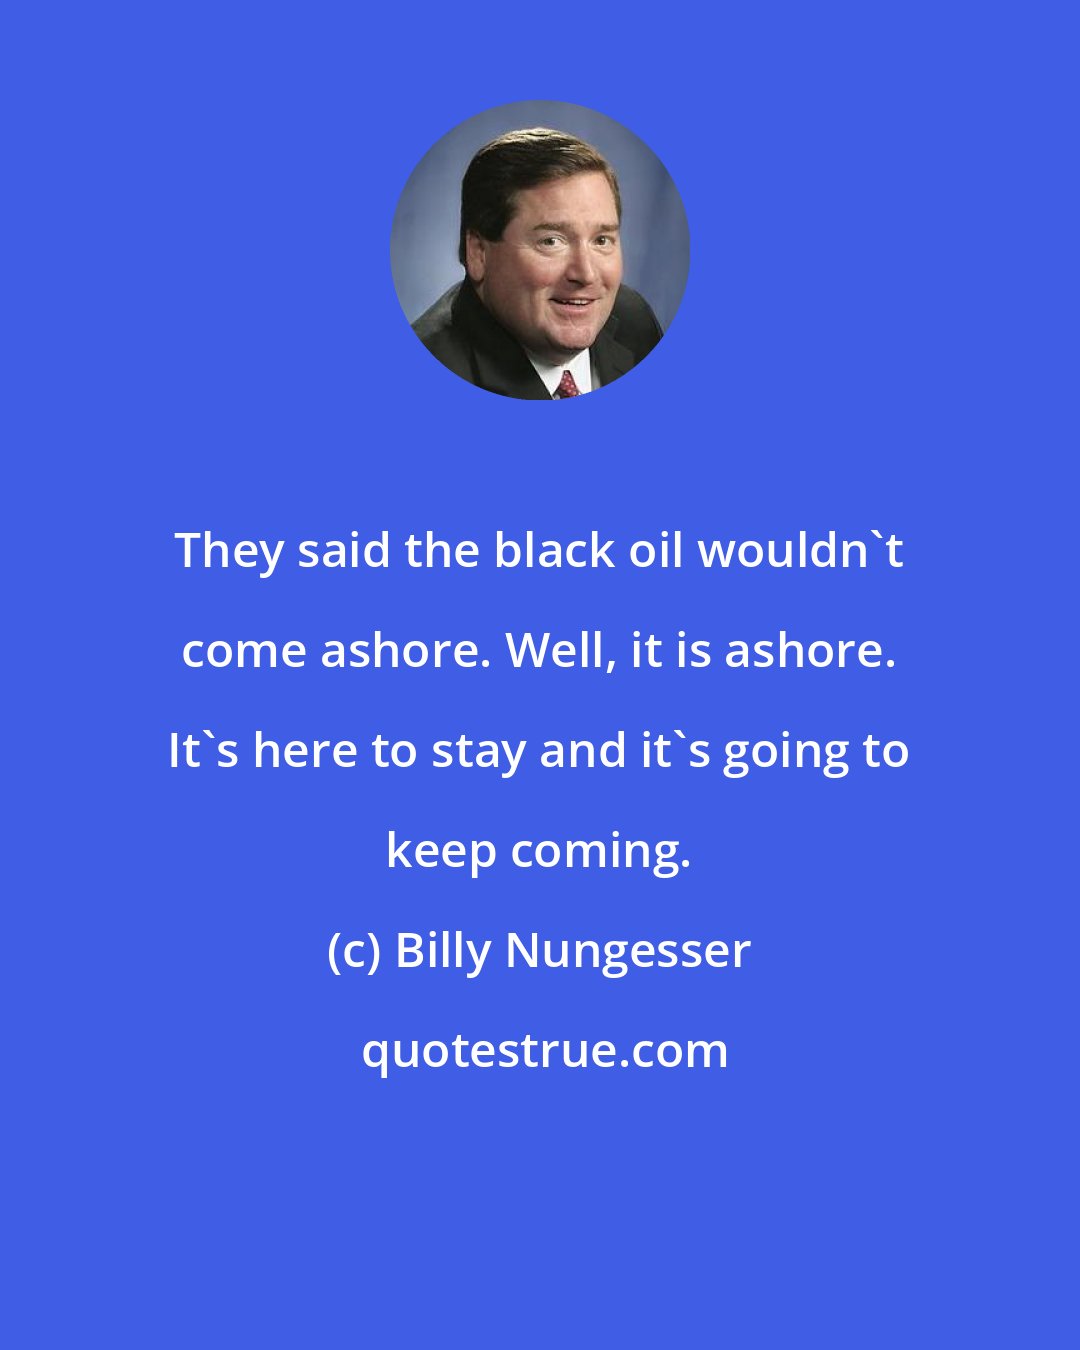 Billy Nungesser: They said the black oil wouldn't come ashore. Well, it is ashore. It's here to stay and it's going to keep coming.